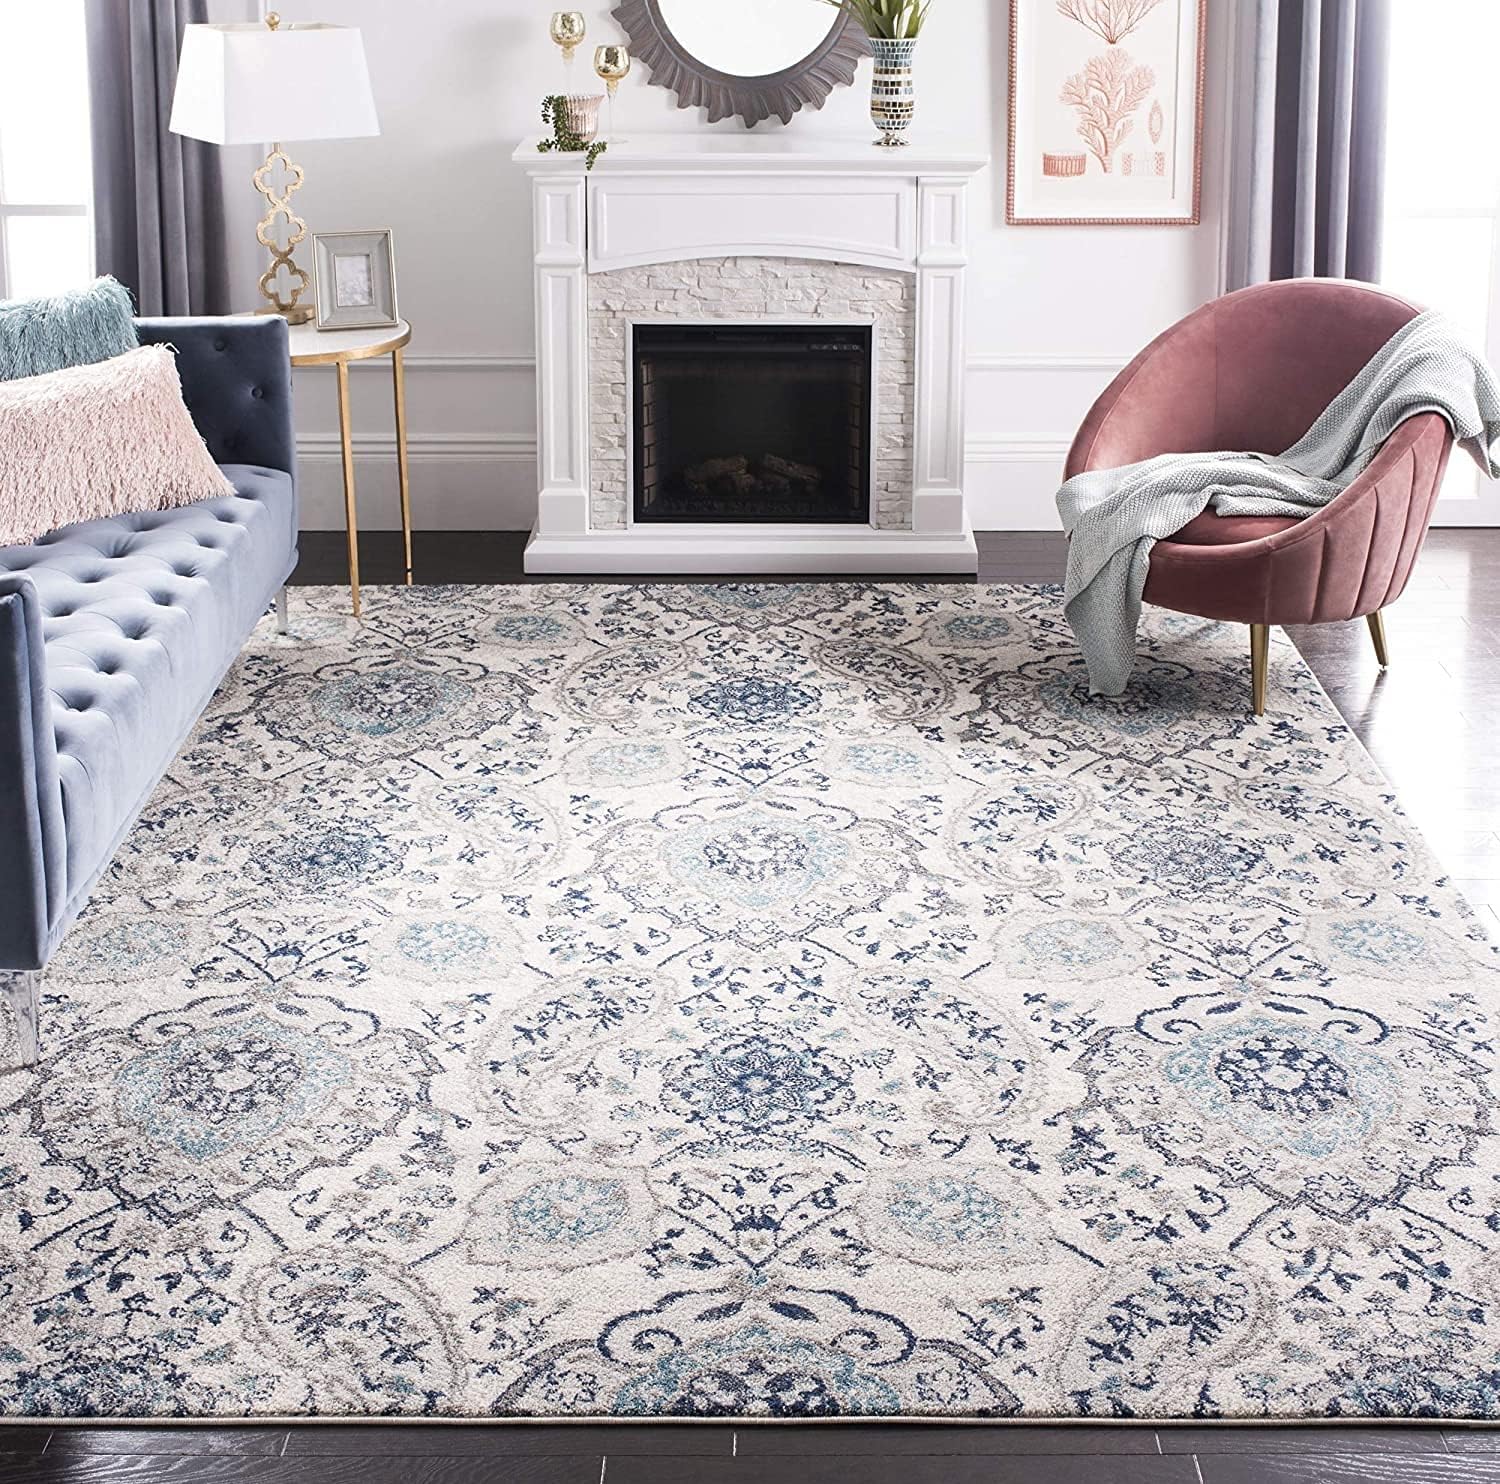 I was a bit apprehensive about ordering a rug I could not see or touch prior to buying, however, I took a leap of faith. Boy, am I glad that I did!!!We absolutely LOVE this rug! I debated getting the teal, navy, or gray, and we went with the gray. It is PERFECT! It has subtle pops of navy blue and teal, with various shades of gray. The background color is more of a greige than straight grey, however, we are ok with that. Its better than expected!! It ties all of our rooms together perfectly!!